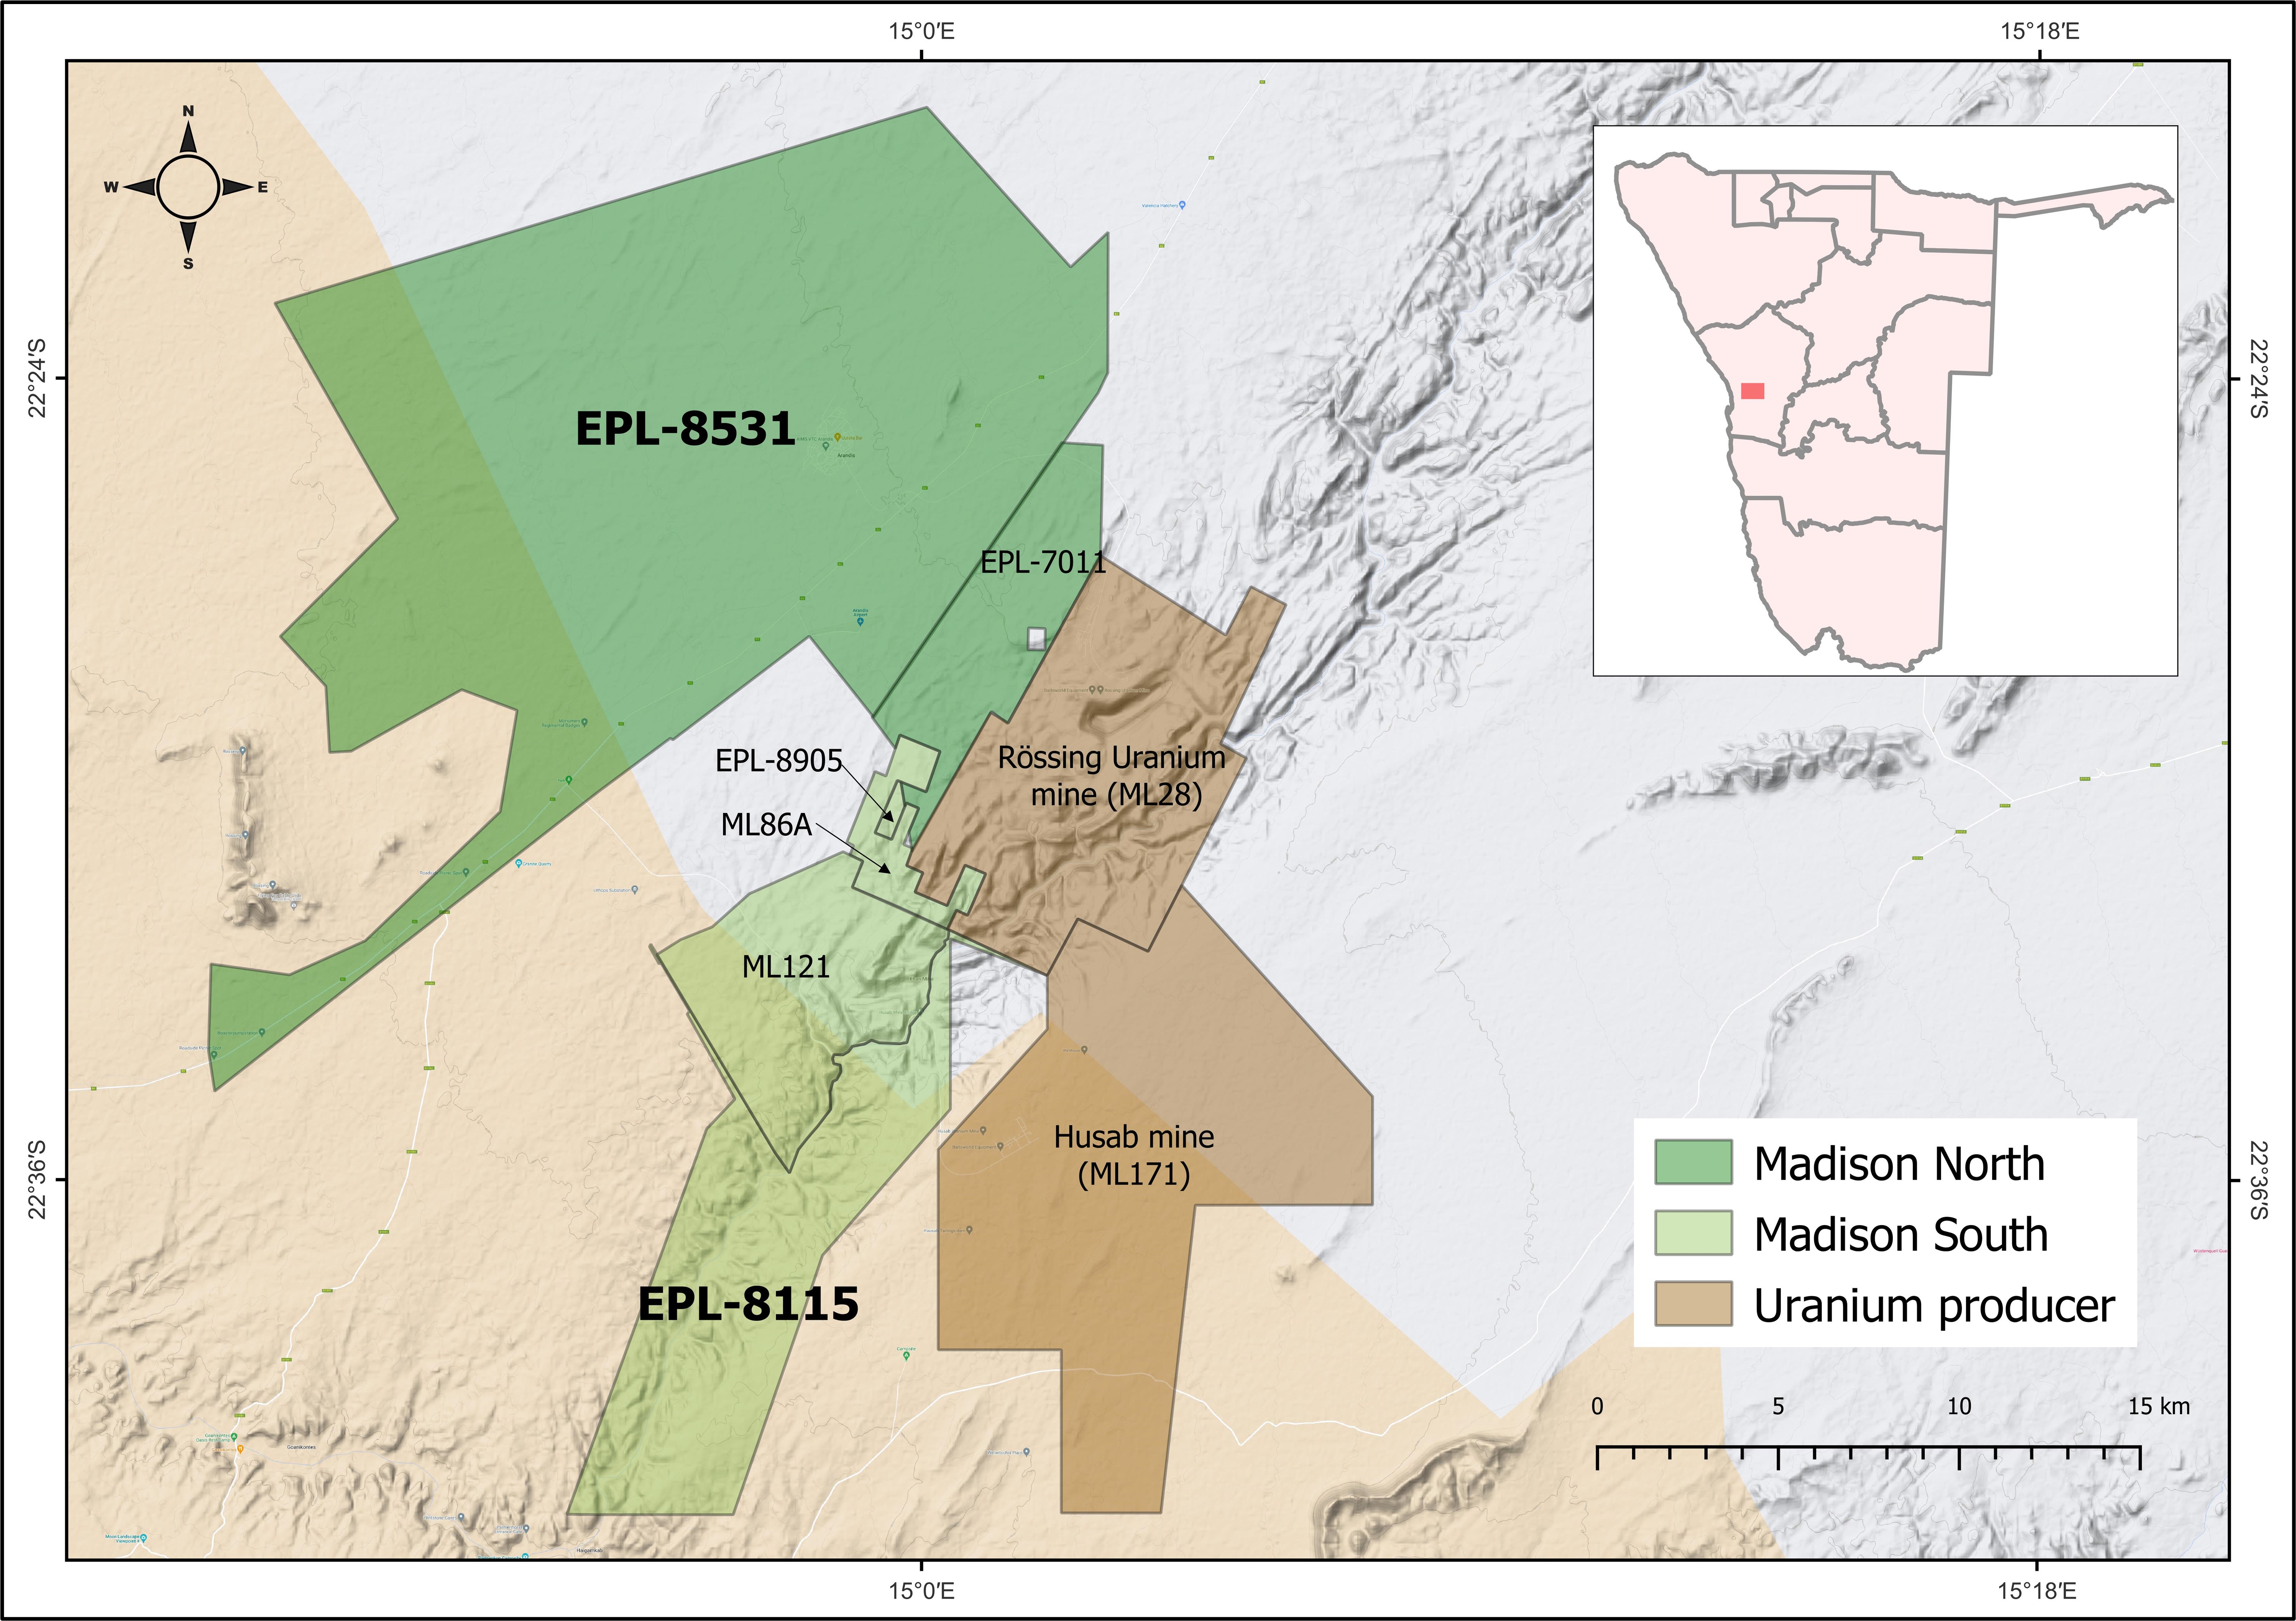 Location of EPL-8531, EPL-8115 and other Madison licences in the Erongo Uranium Province.